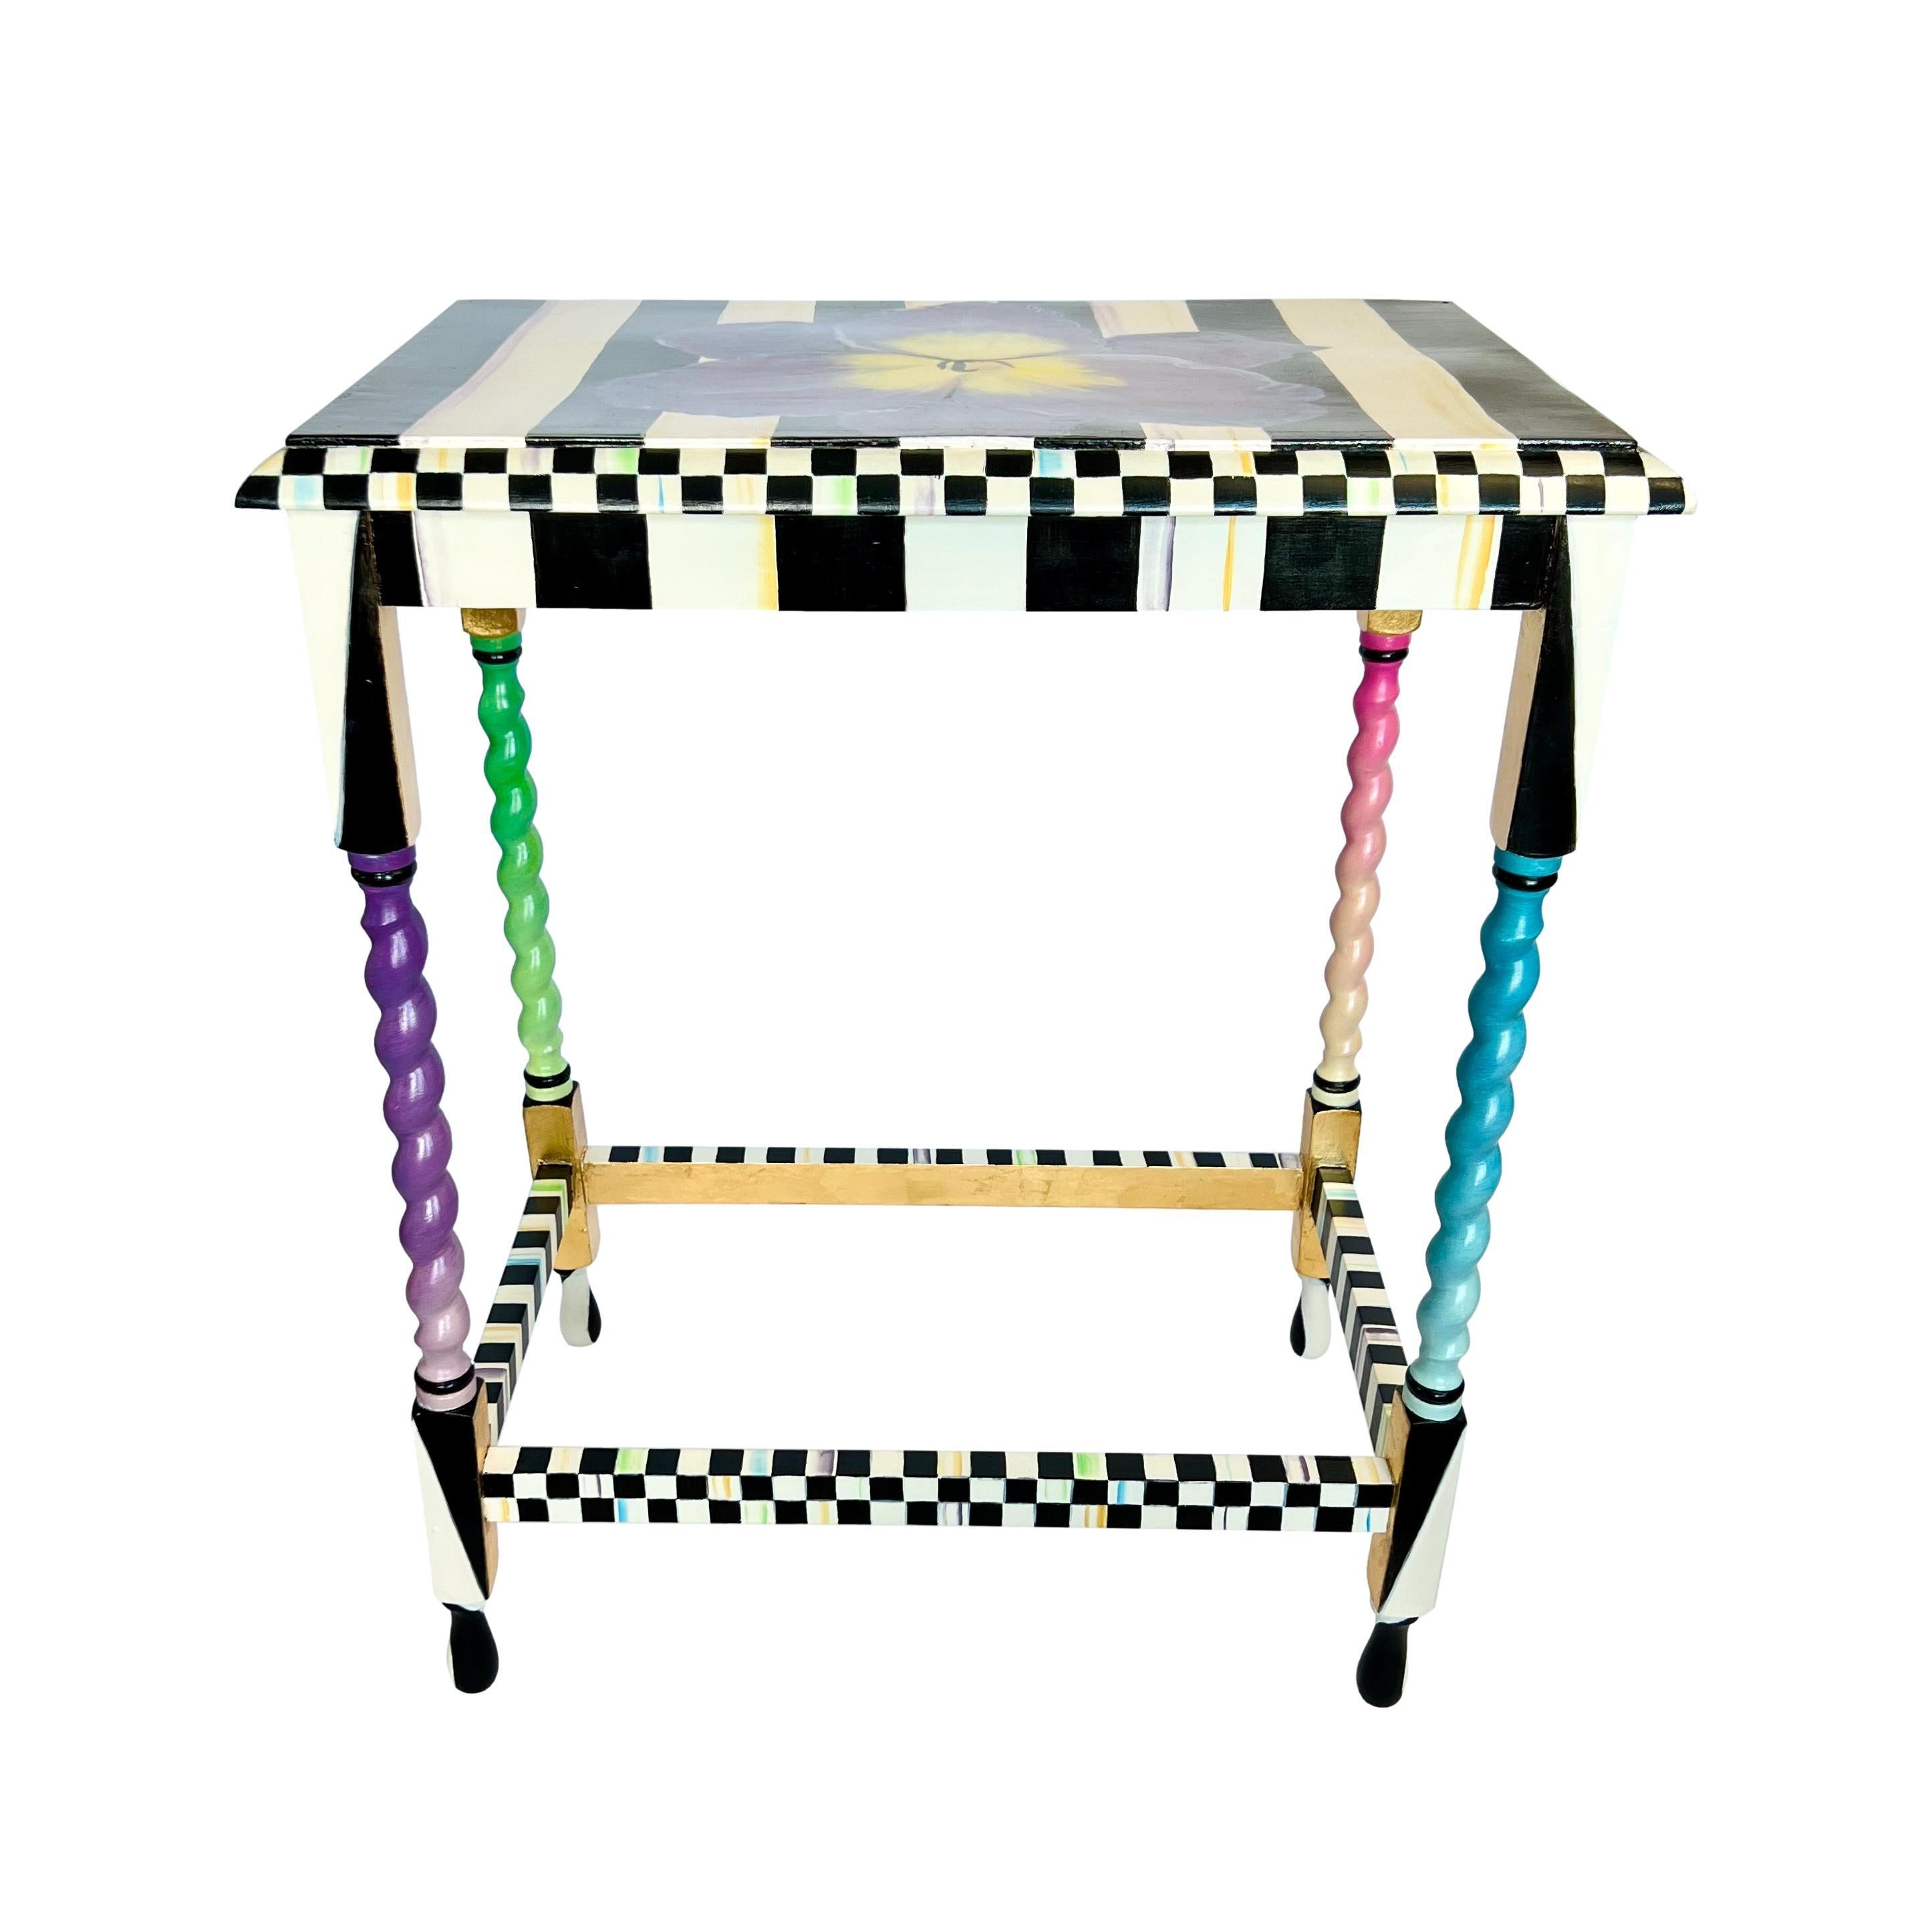 This antique English tall barley twist rectangular side table has been given a hand painted update in the manner of MacKenzie-Childs. The top of this one-of-a-kind piece features a centered purple iris flower over vertical cream and black stripes